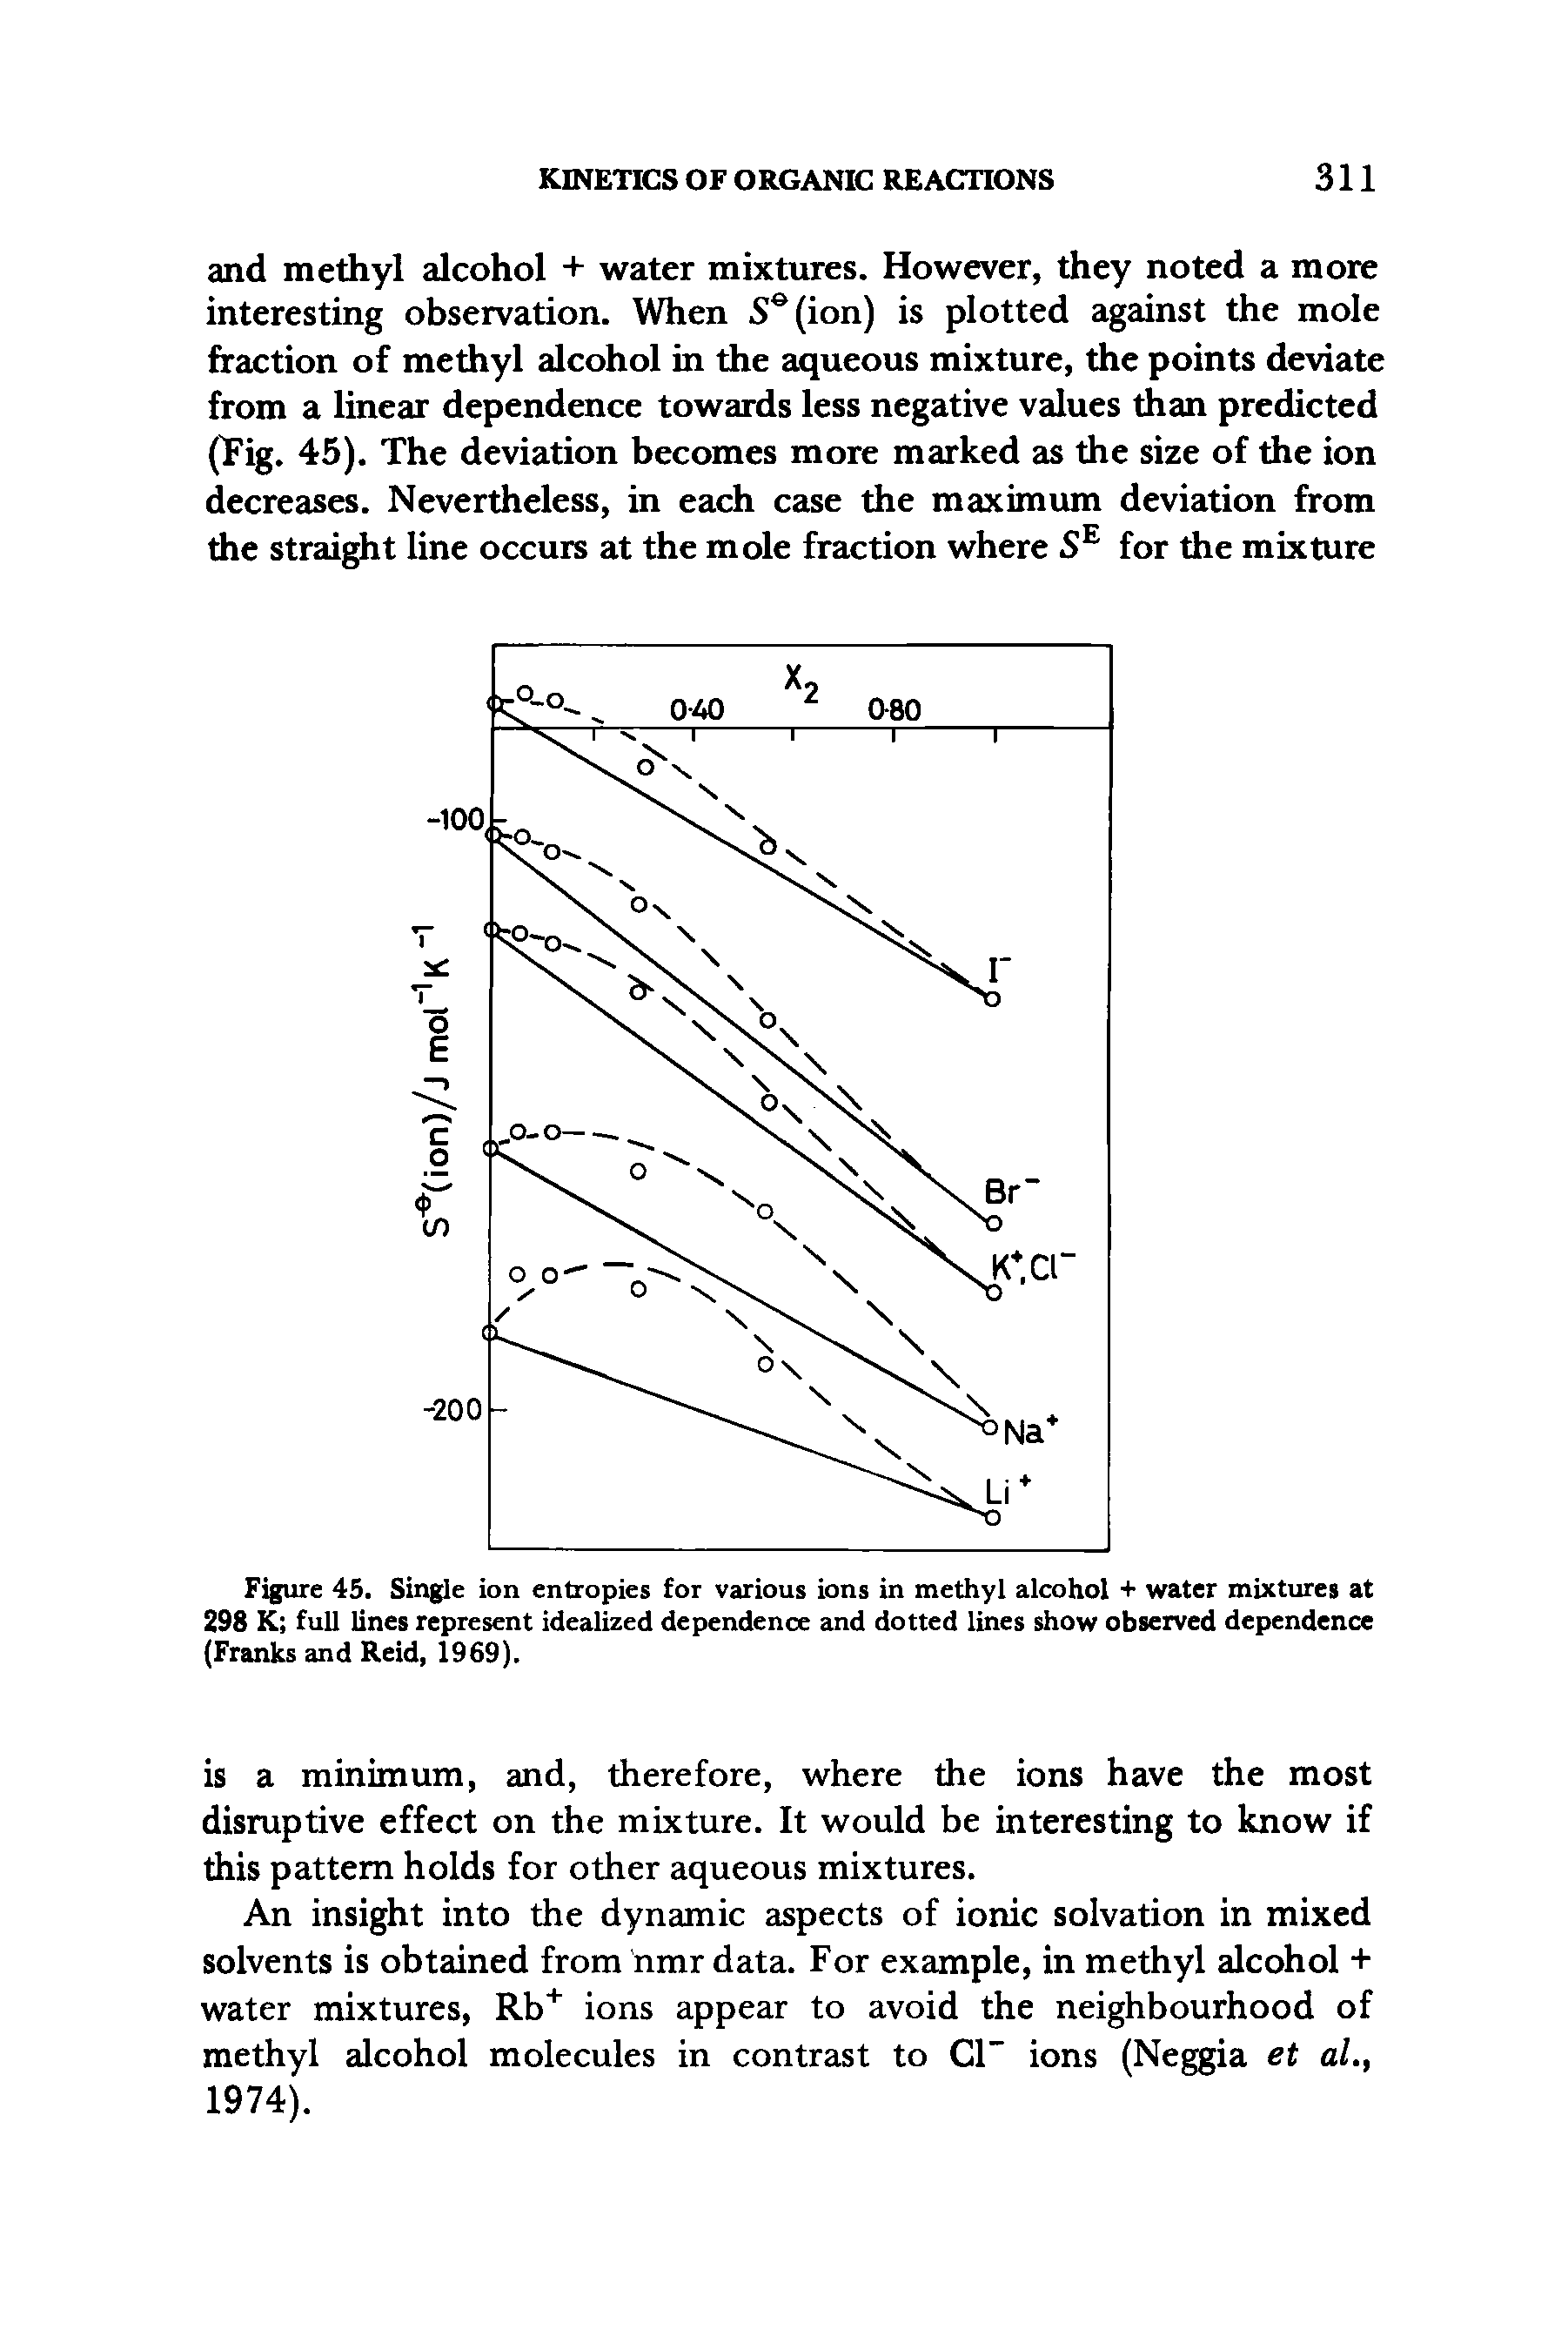 Figure 45. Single ion entropies for various ions in methyl alcohol + water mixtures at 298 K full lines represent idealized dependence and dotted lines show observed dependence (Franks and Reid, 1969).